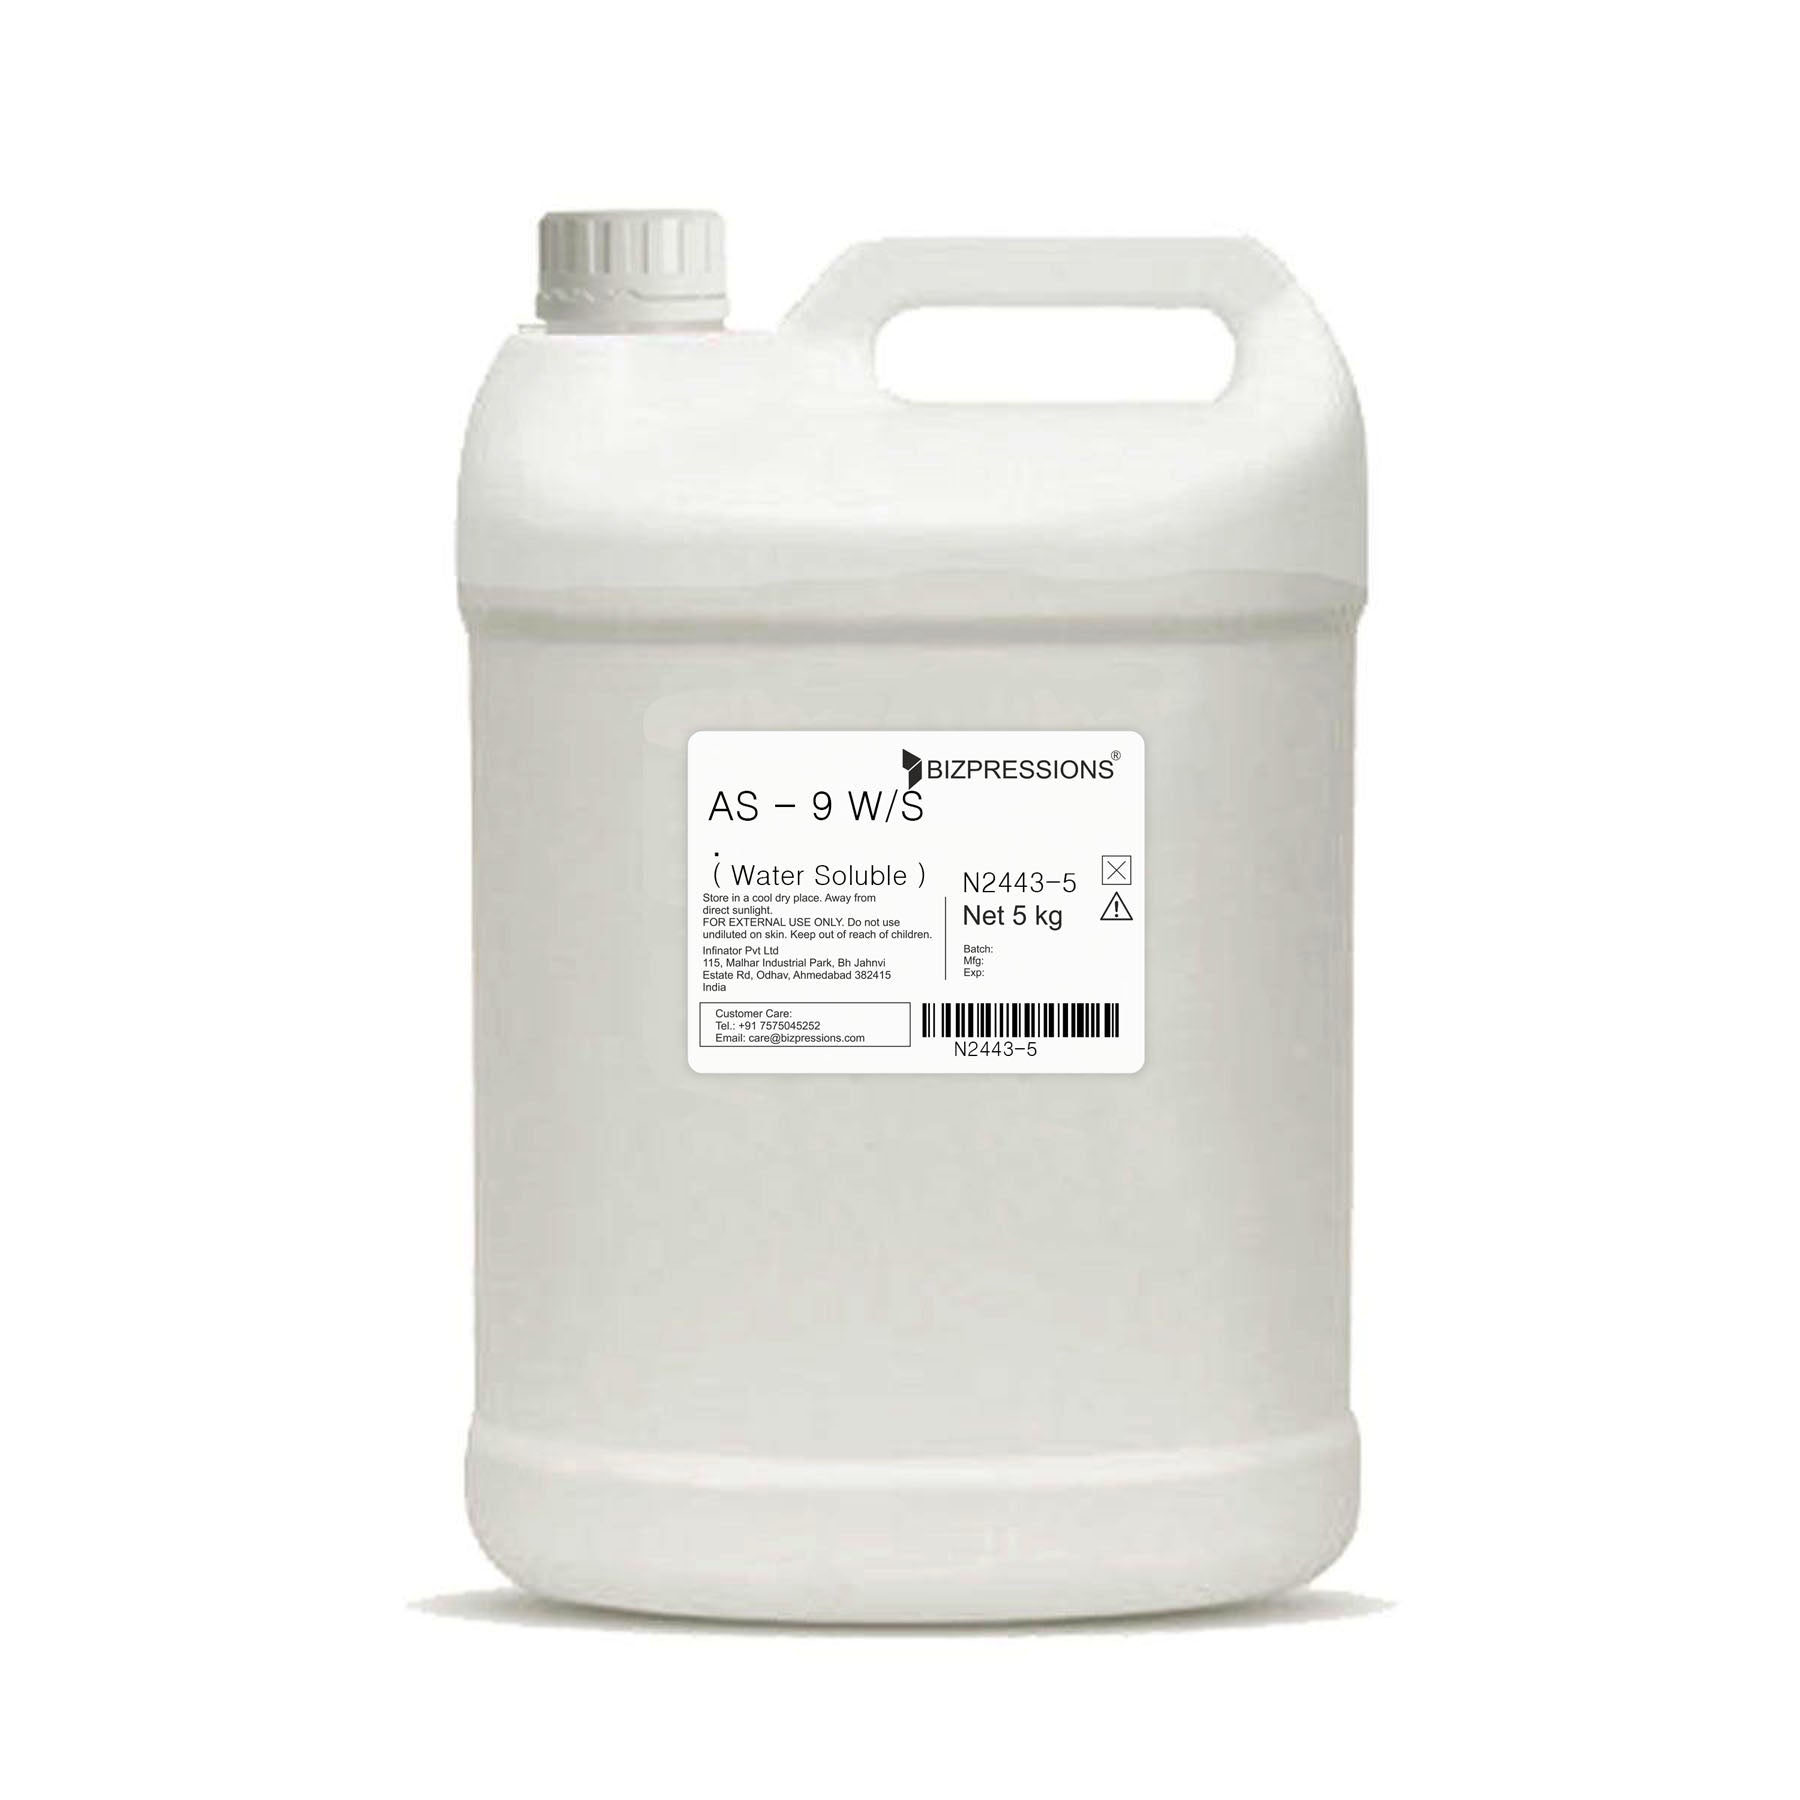 AS - 9 W/S - Fragrance ( Water Soluble ) - 5 kg